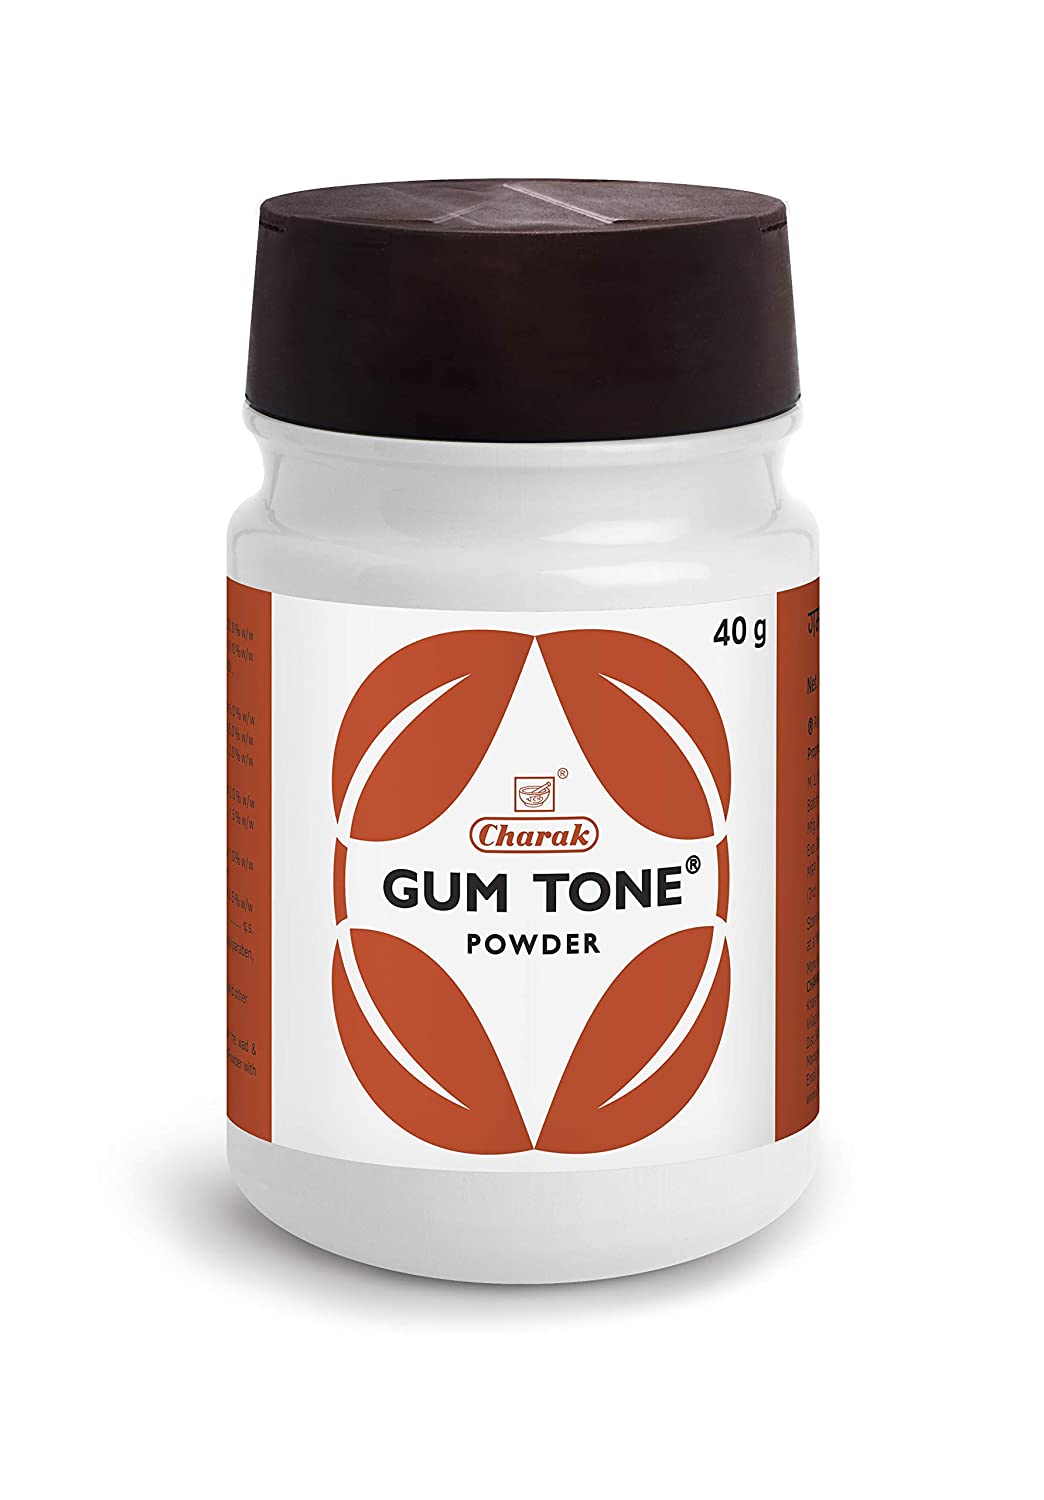 Shop Gumtone Toothpowder 40gm at price 72.00 from Charak Online - Ayush Care